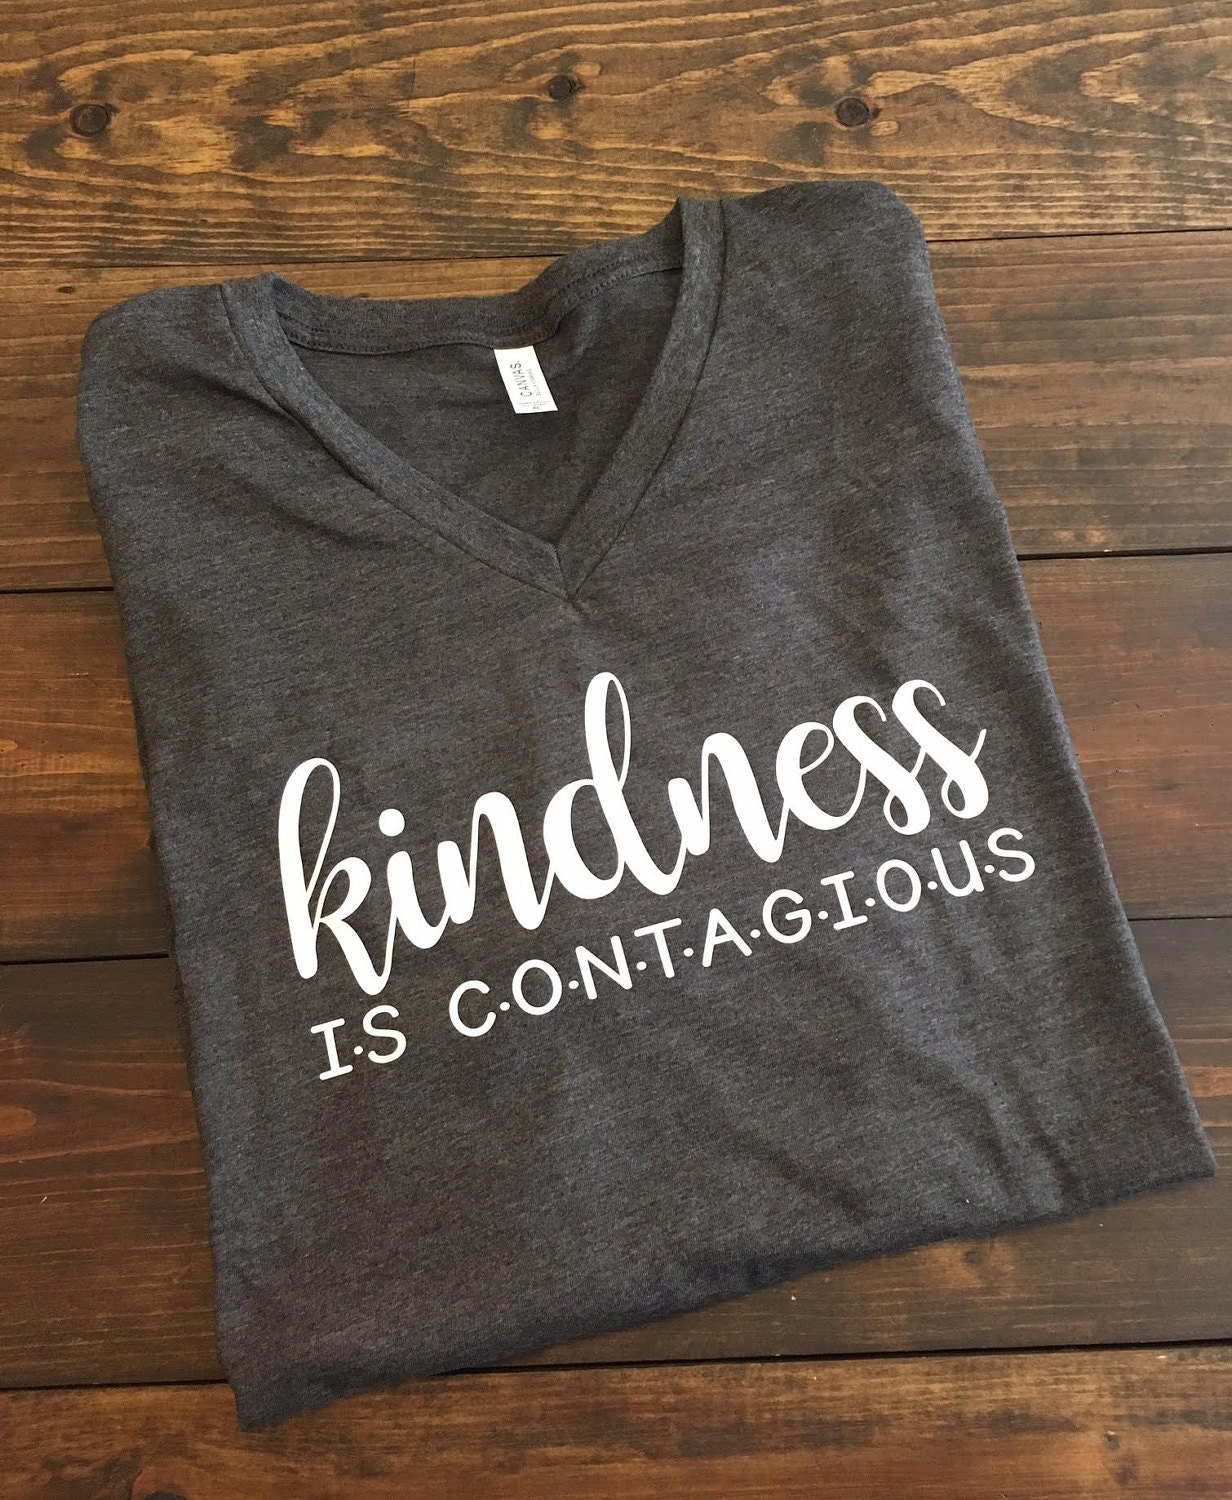 Kindness is Contagious T-Shirt Kindness Matters Shirt V-Neck